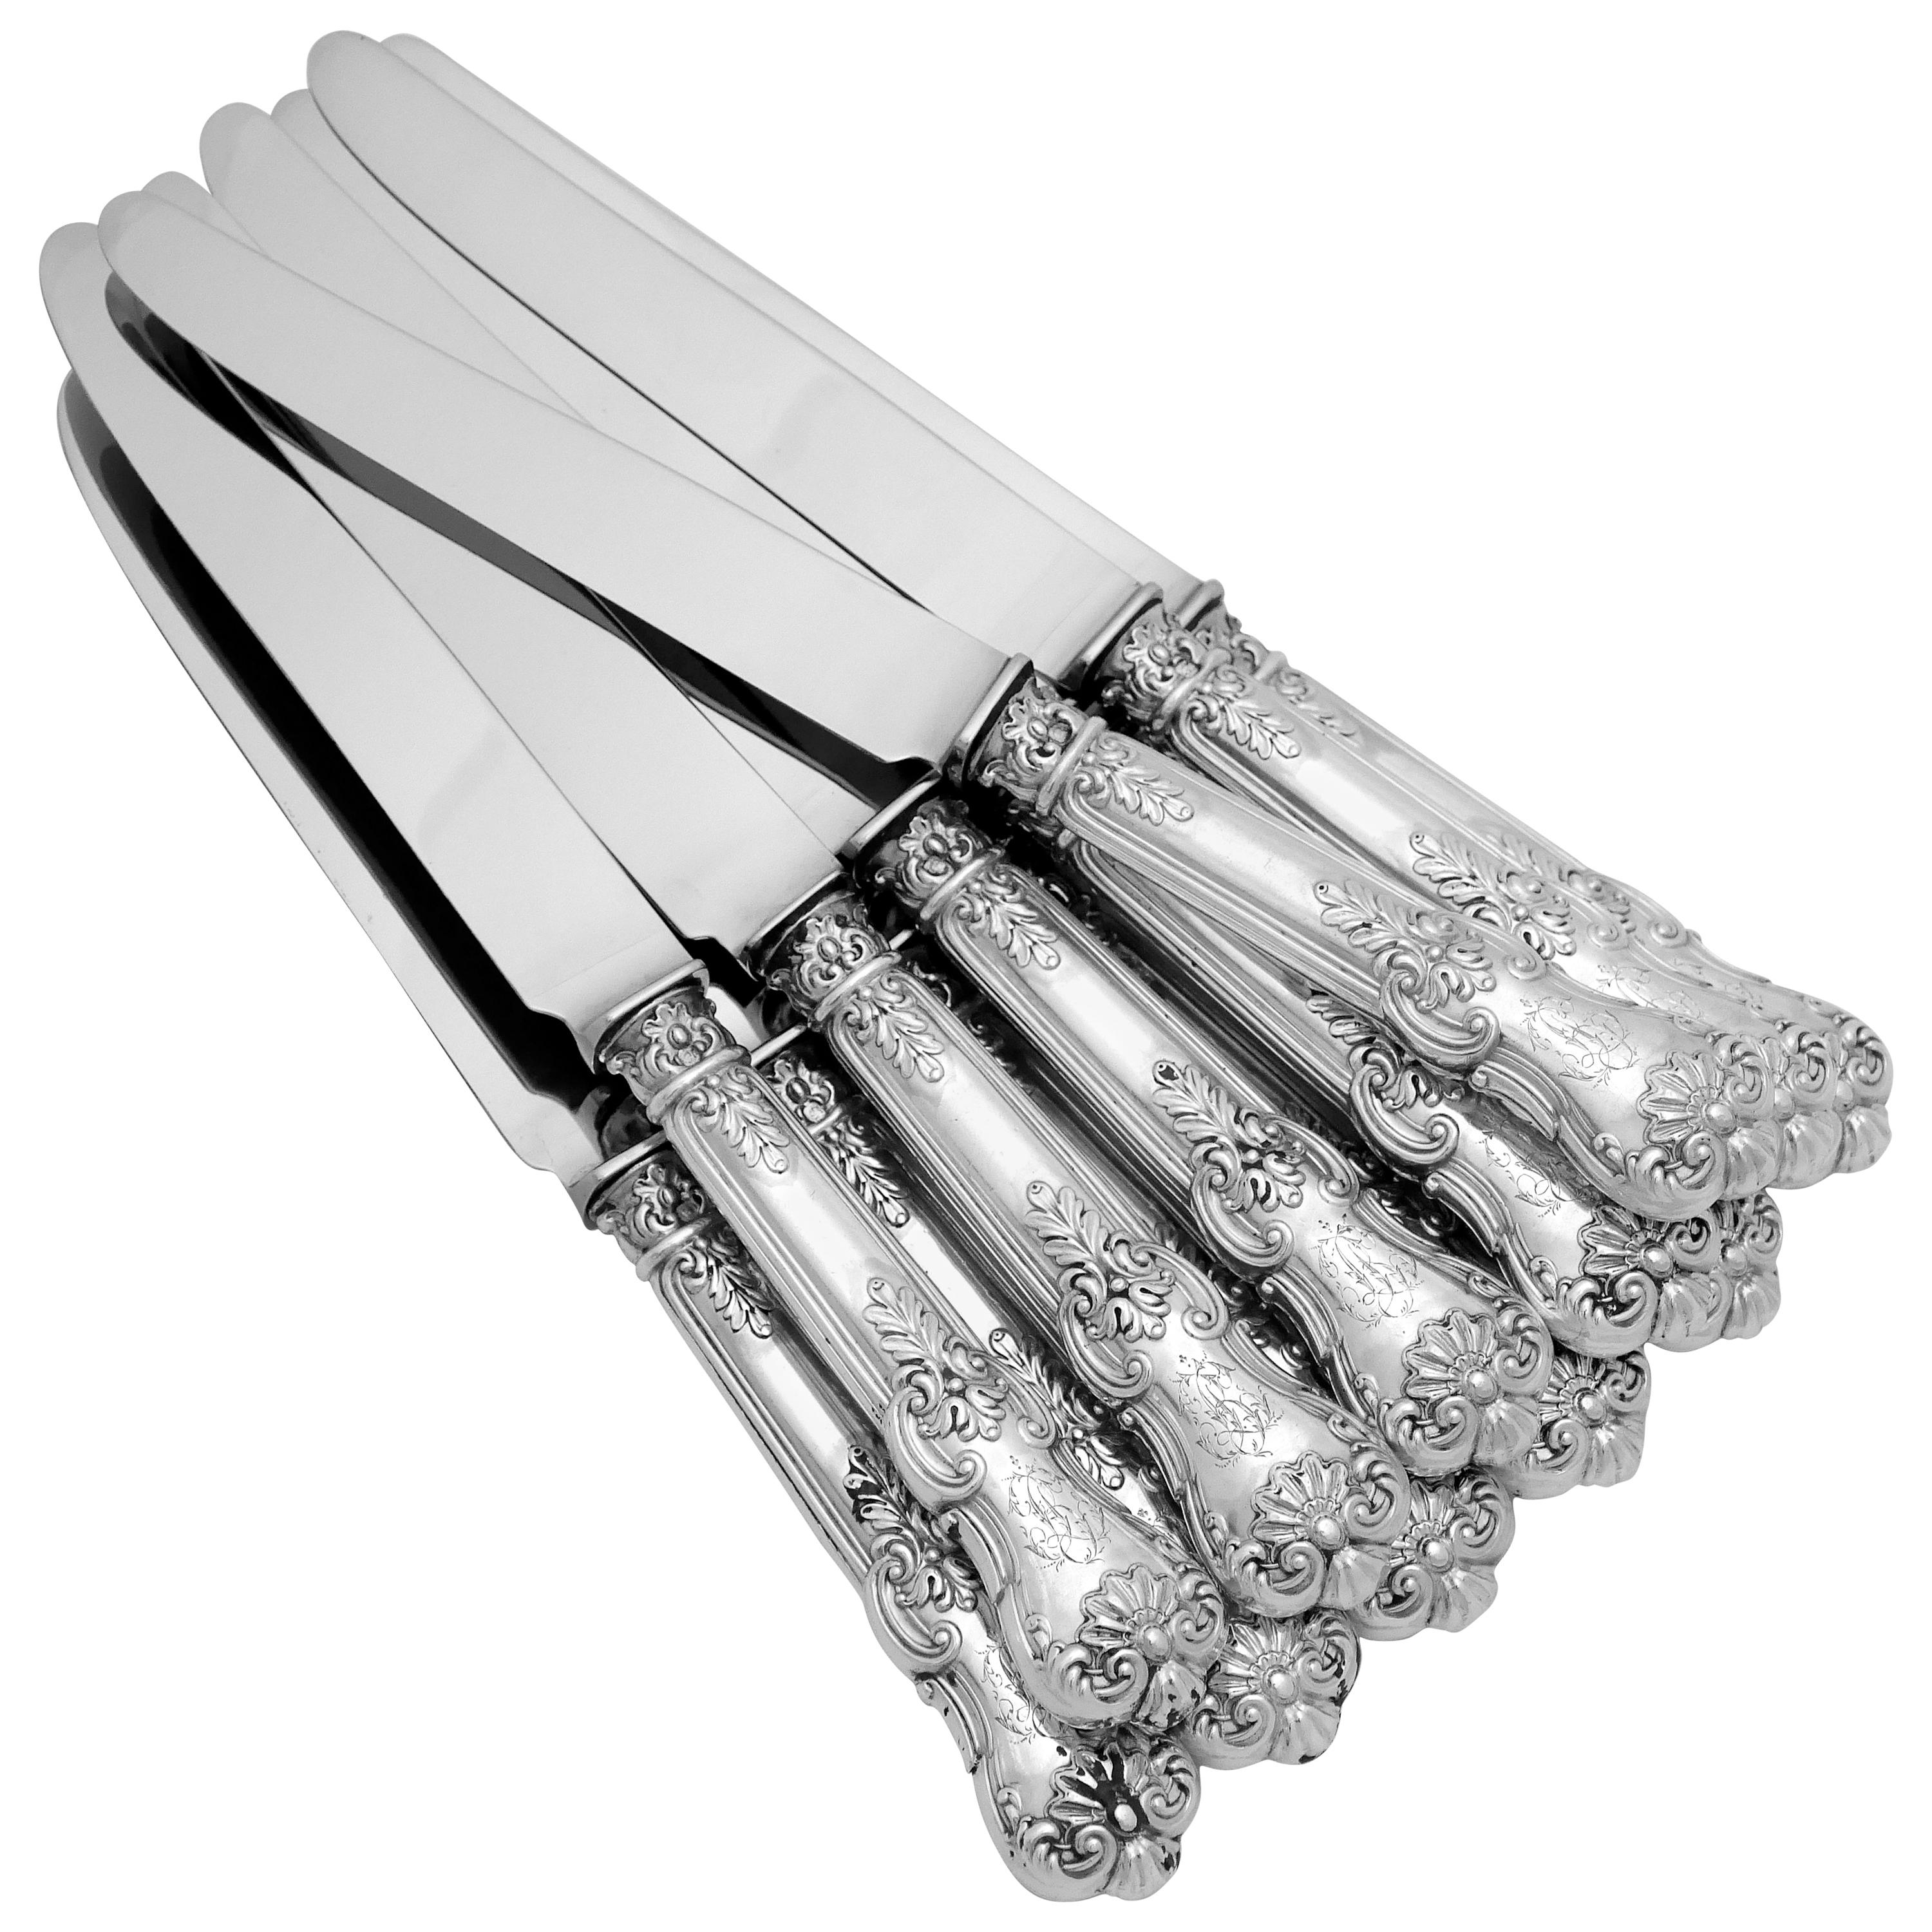 Antique French Sterling Silver Dinner Knife Set 12 Pc New Stainless Steel Blades For Sale